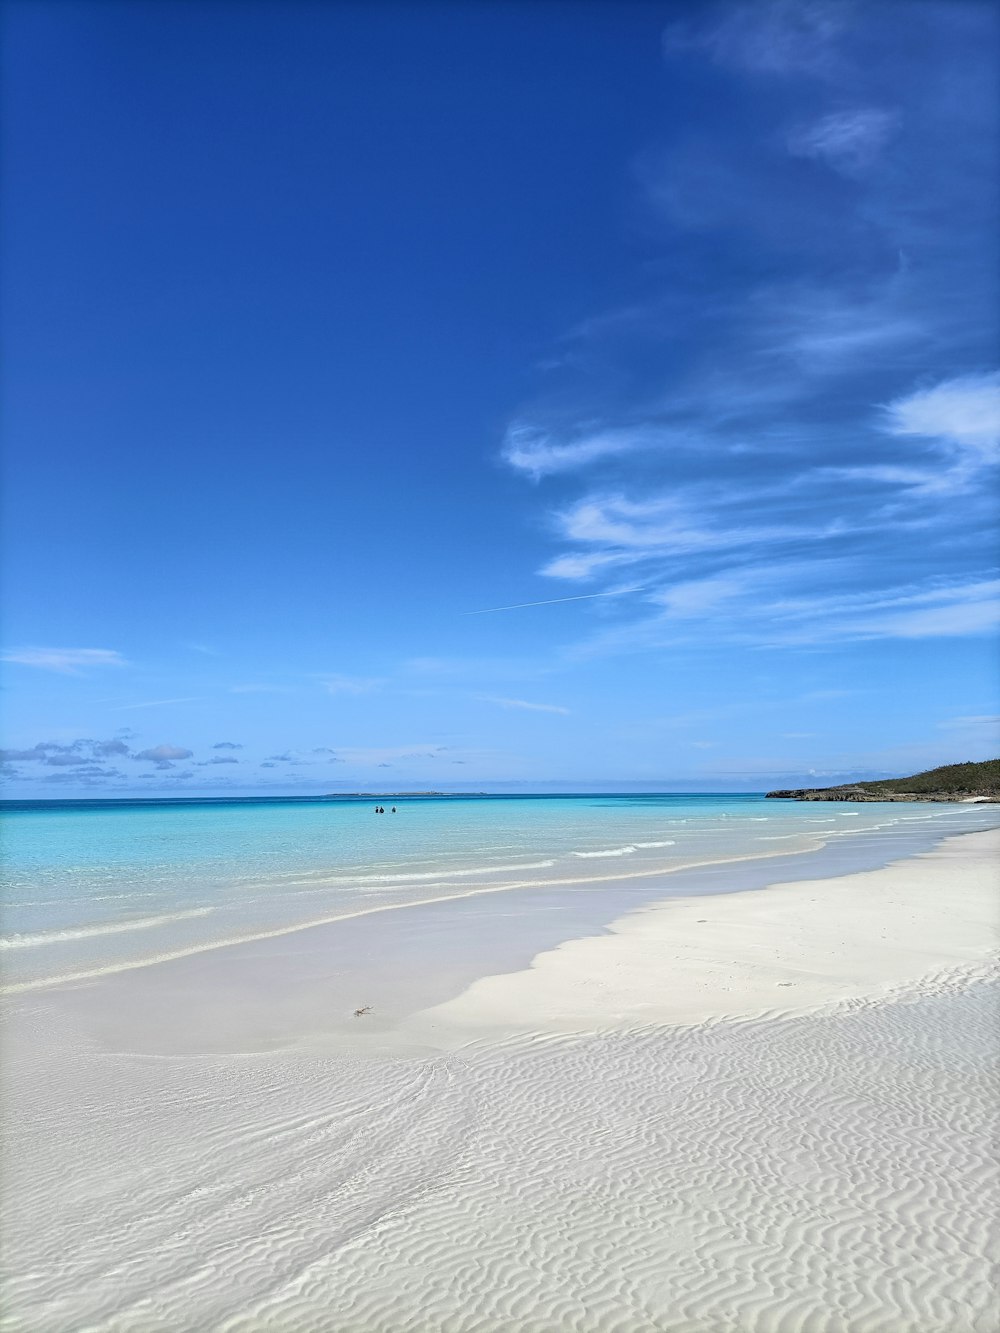 a sandy beach with clear blue water and a boat in the distance